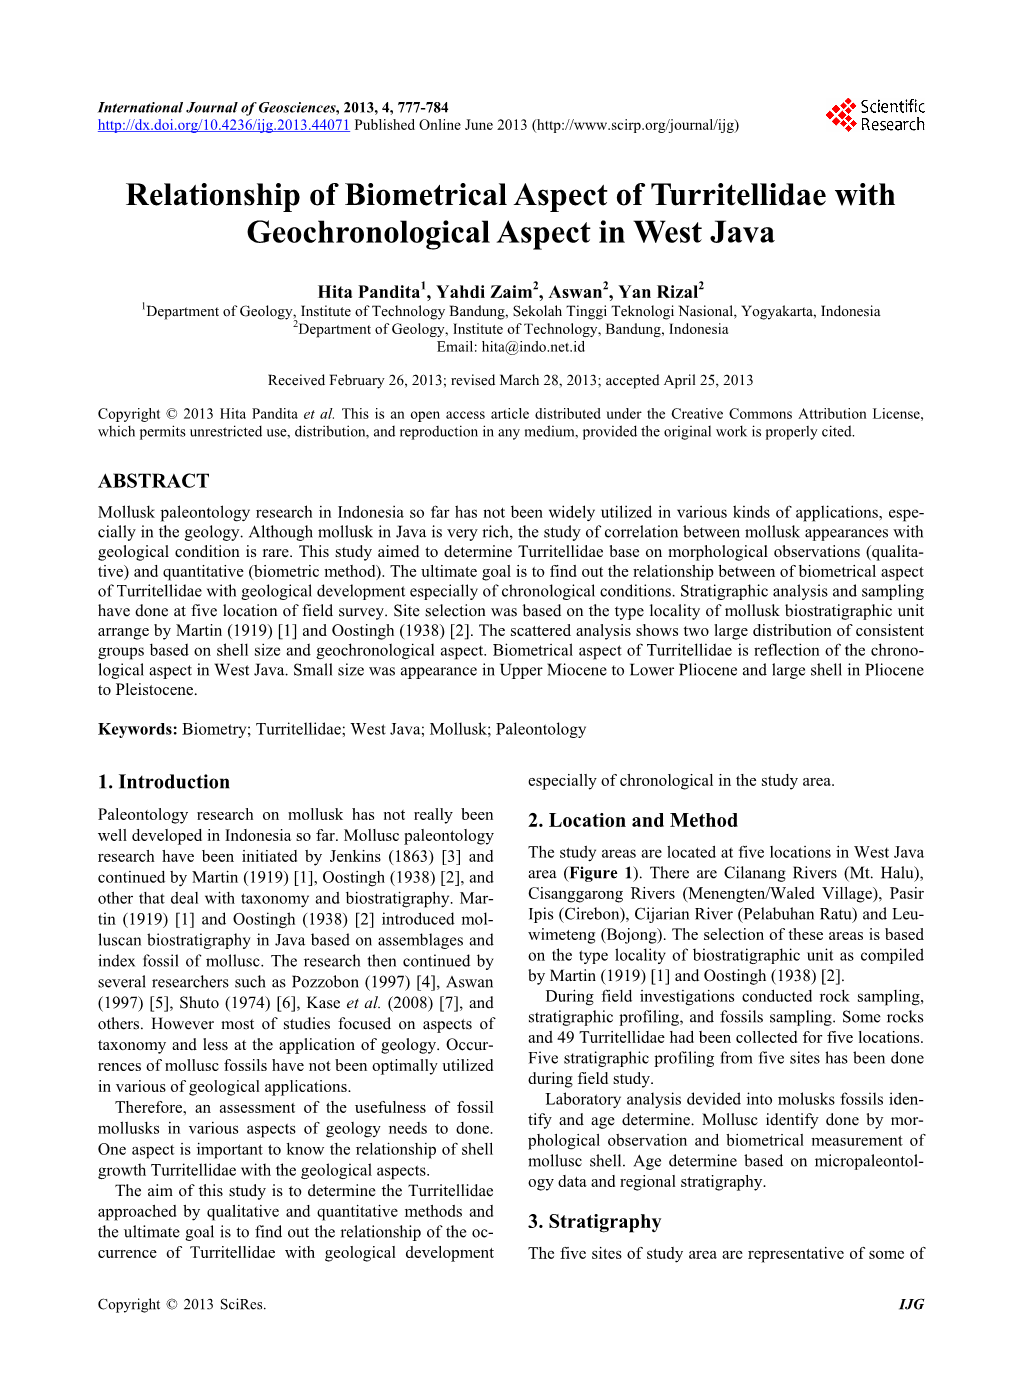 Relationship of Biometrical Aspect of Turritellidae with Geochronological Aspect in West Java